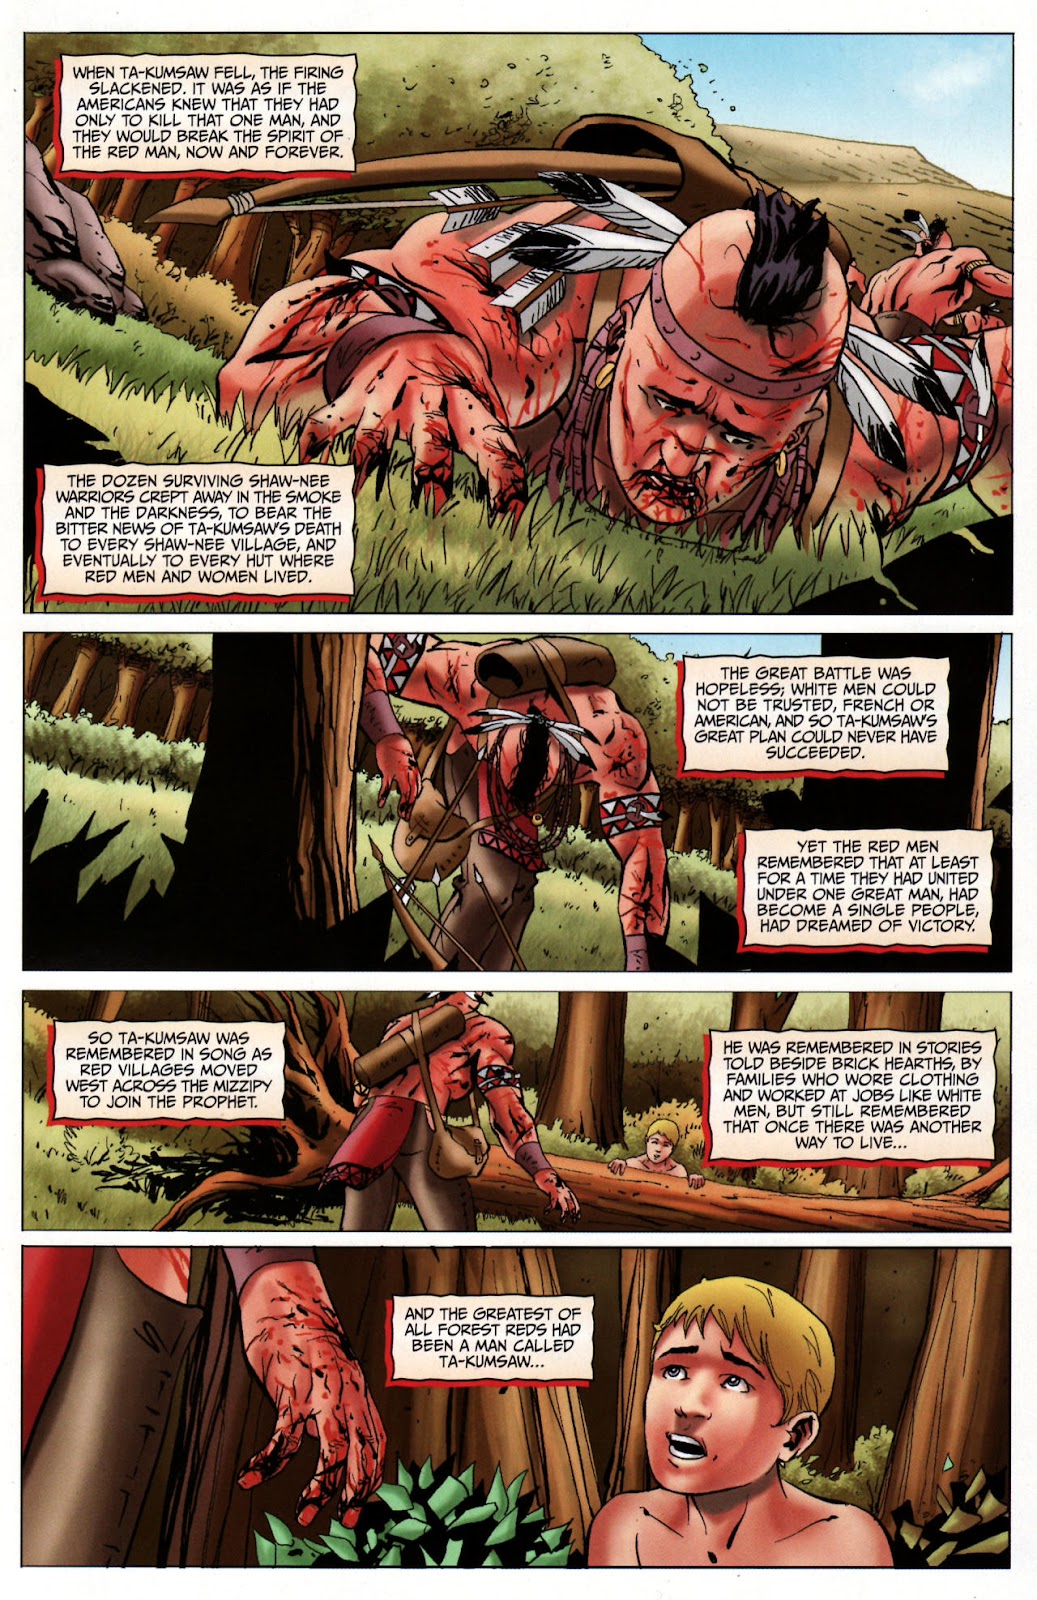 Red Prophet: The Tales of Alvin Maker issue 12 - Page 19